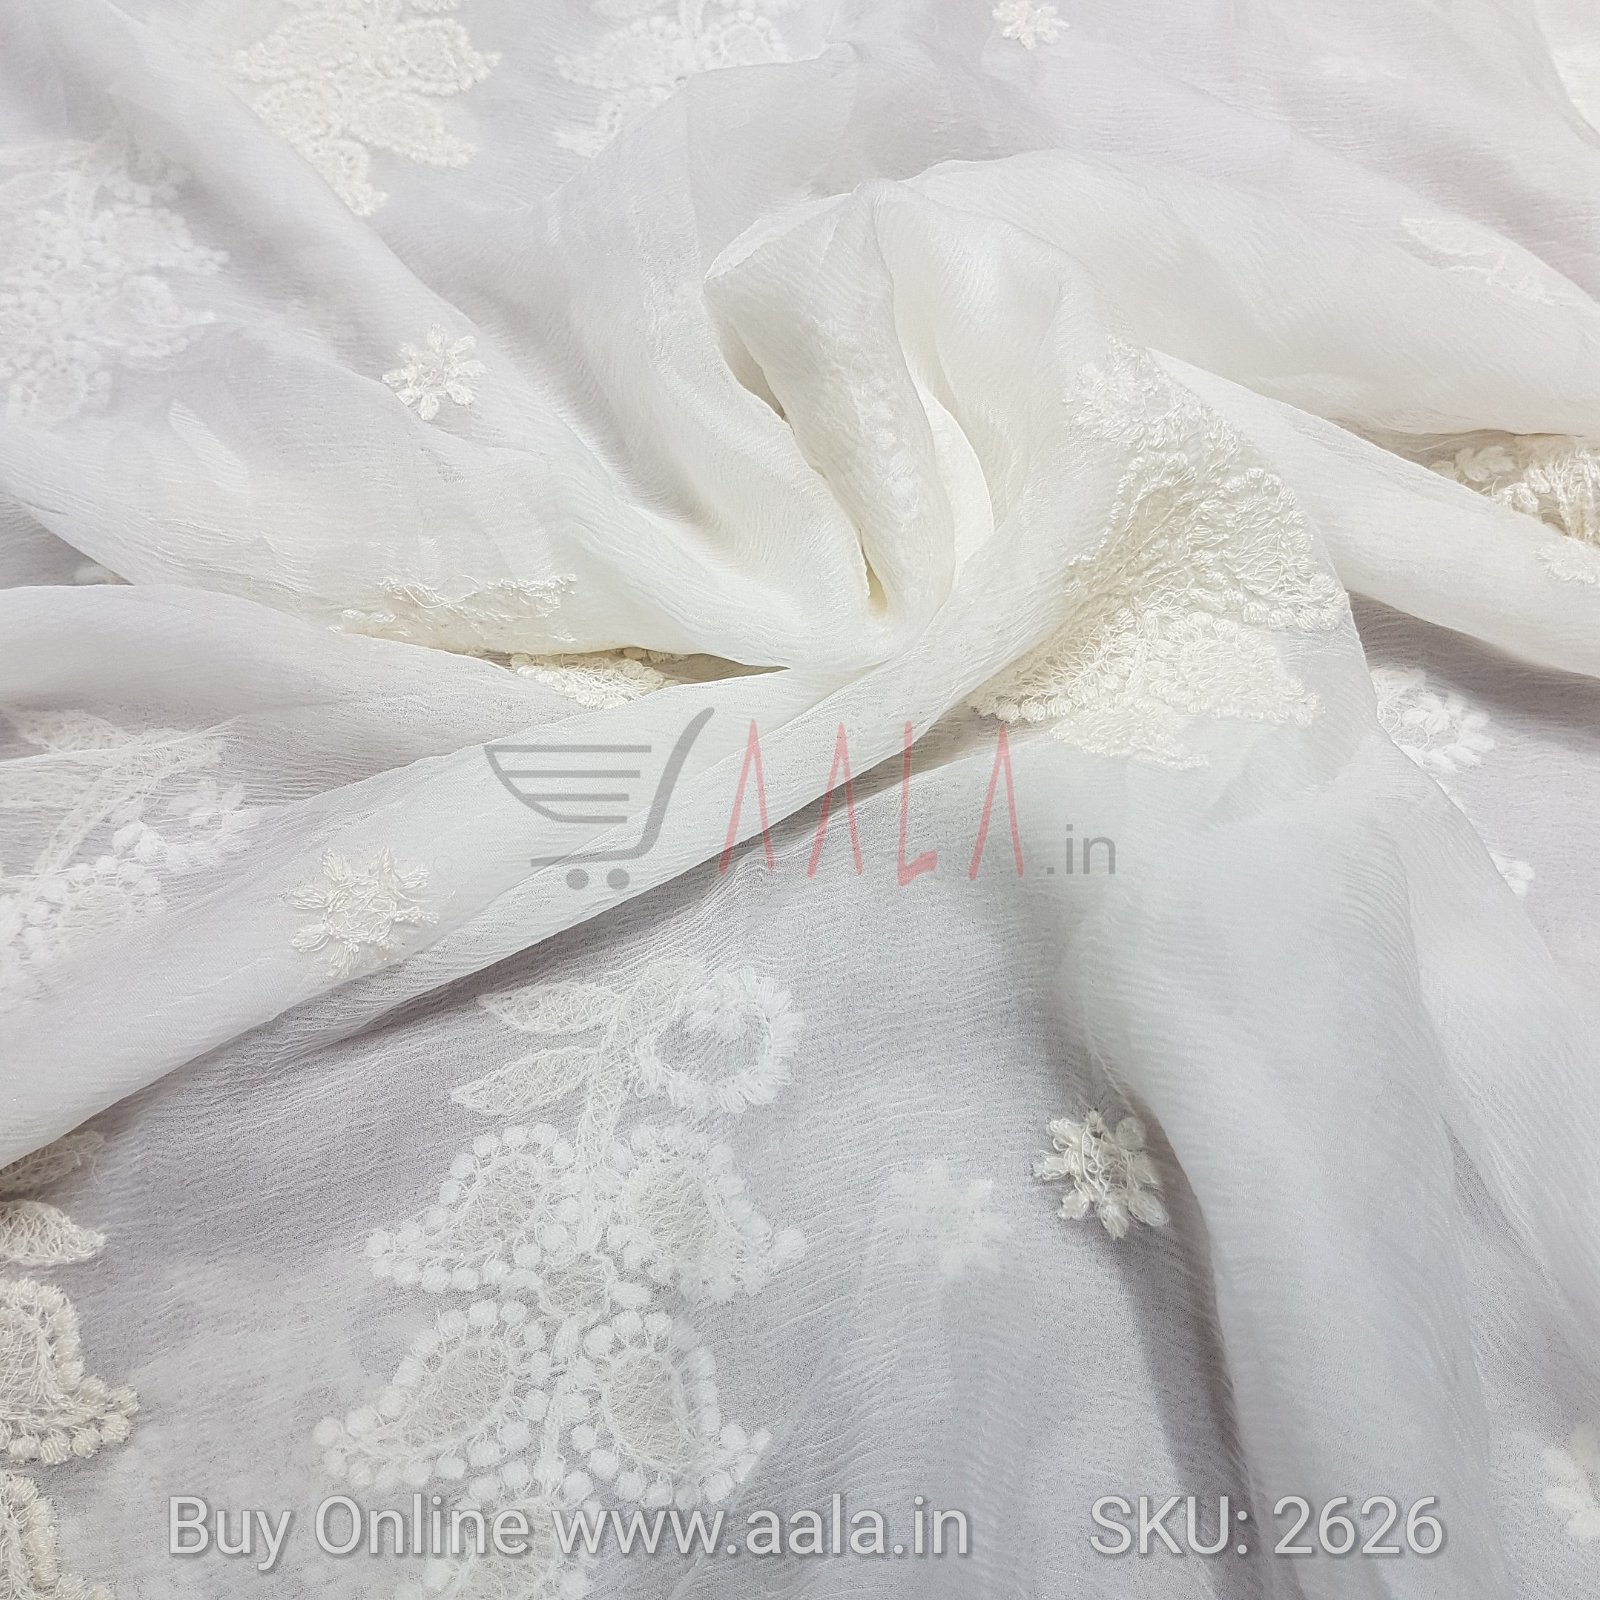 Embroidered Chiffon Viscose 42 Inches Dyeable 2.25 Metres #2626